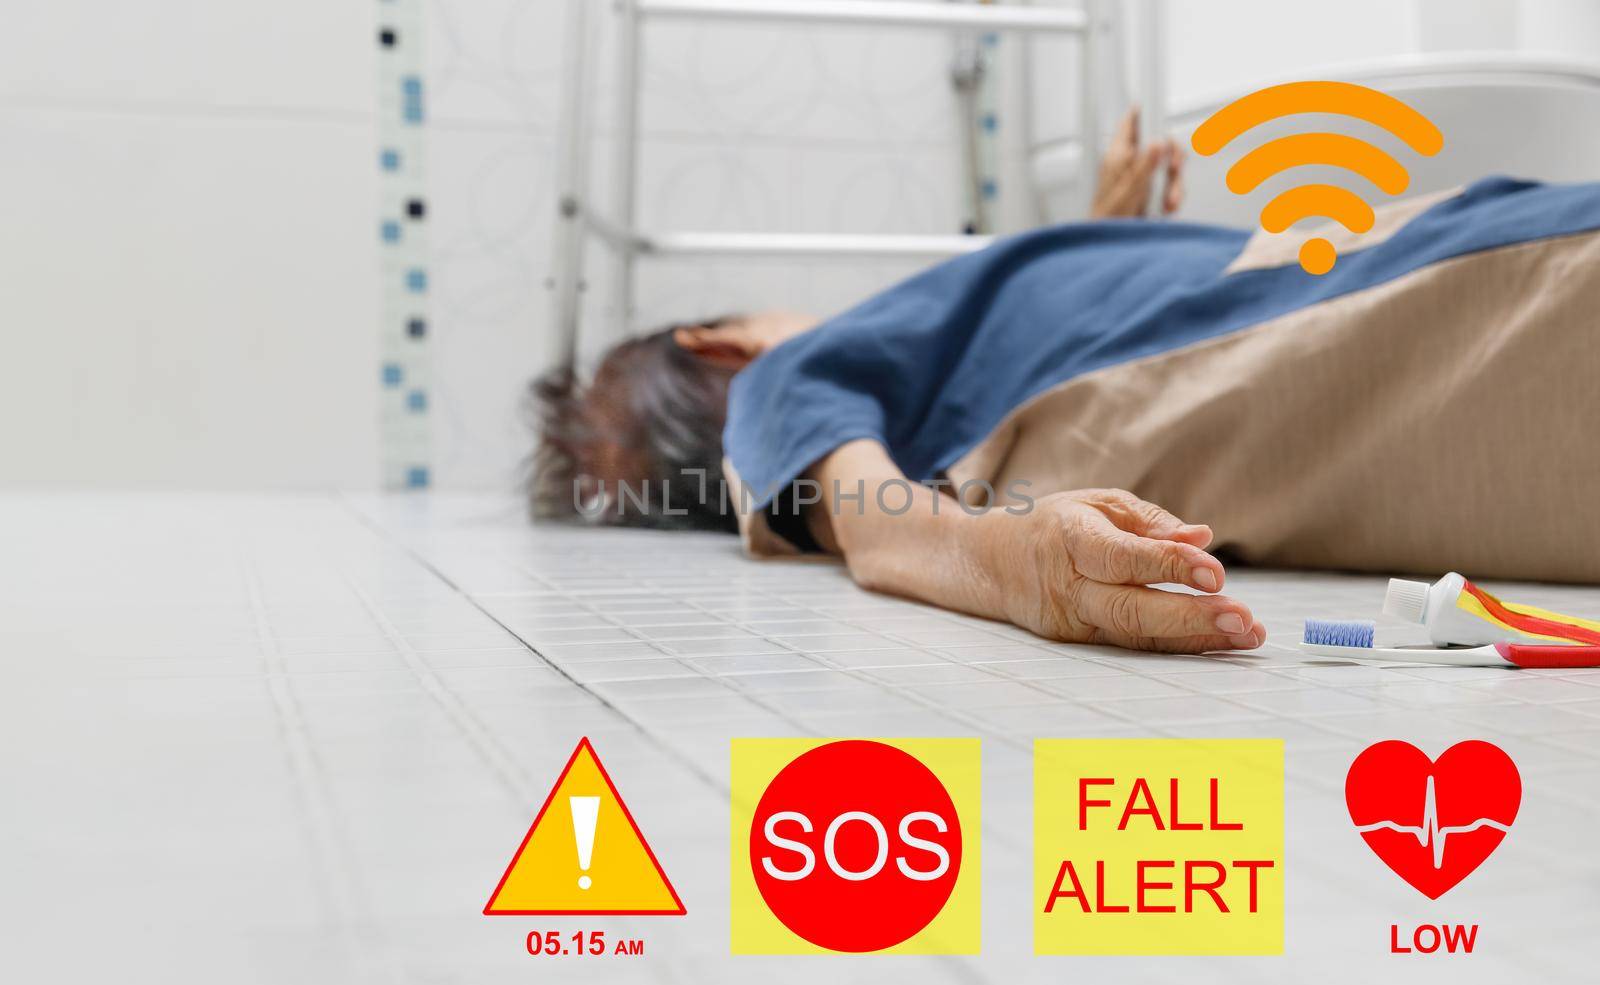 Medical fall accident detection is alert that elderly woman falling in bathroom because slippery surfaces by toa55